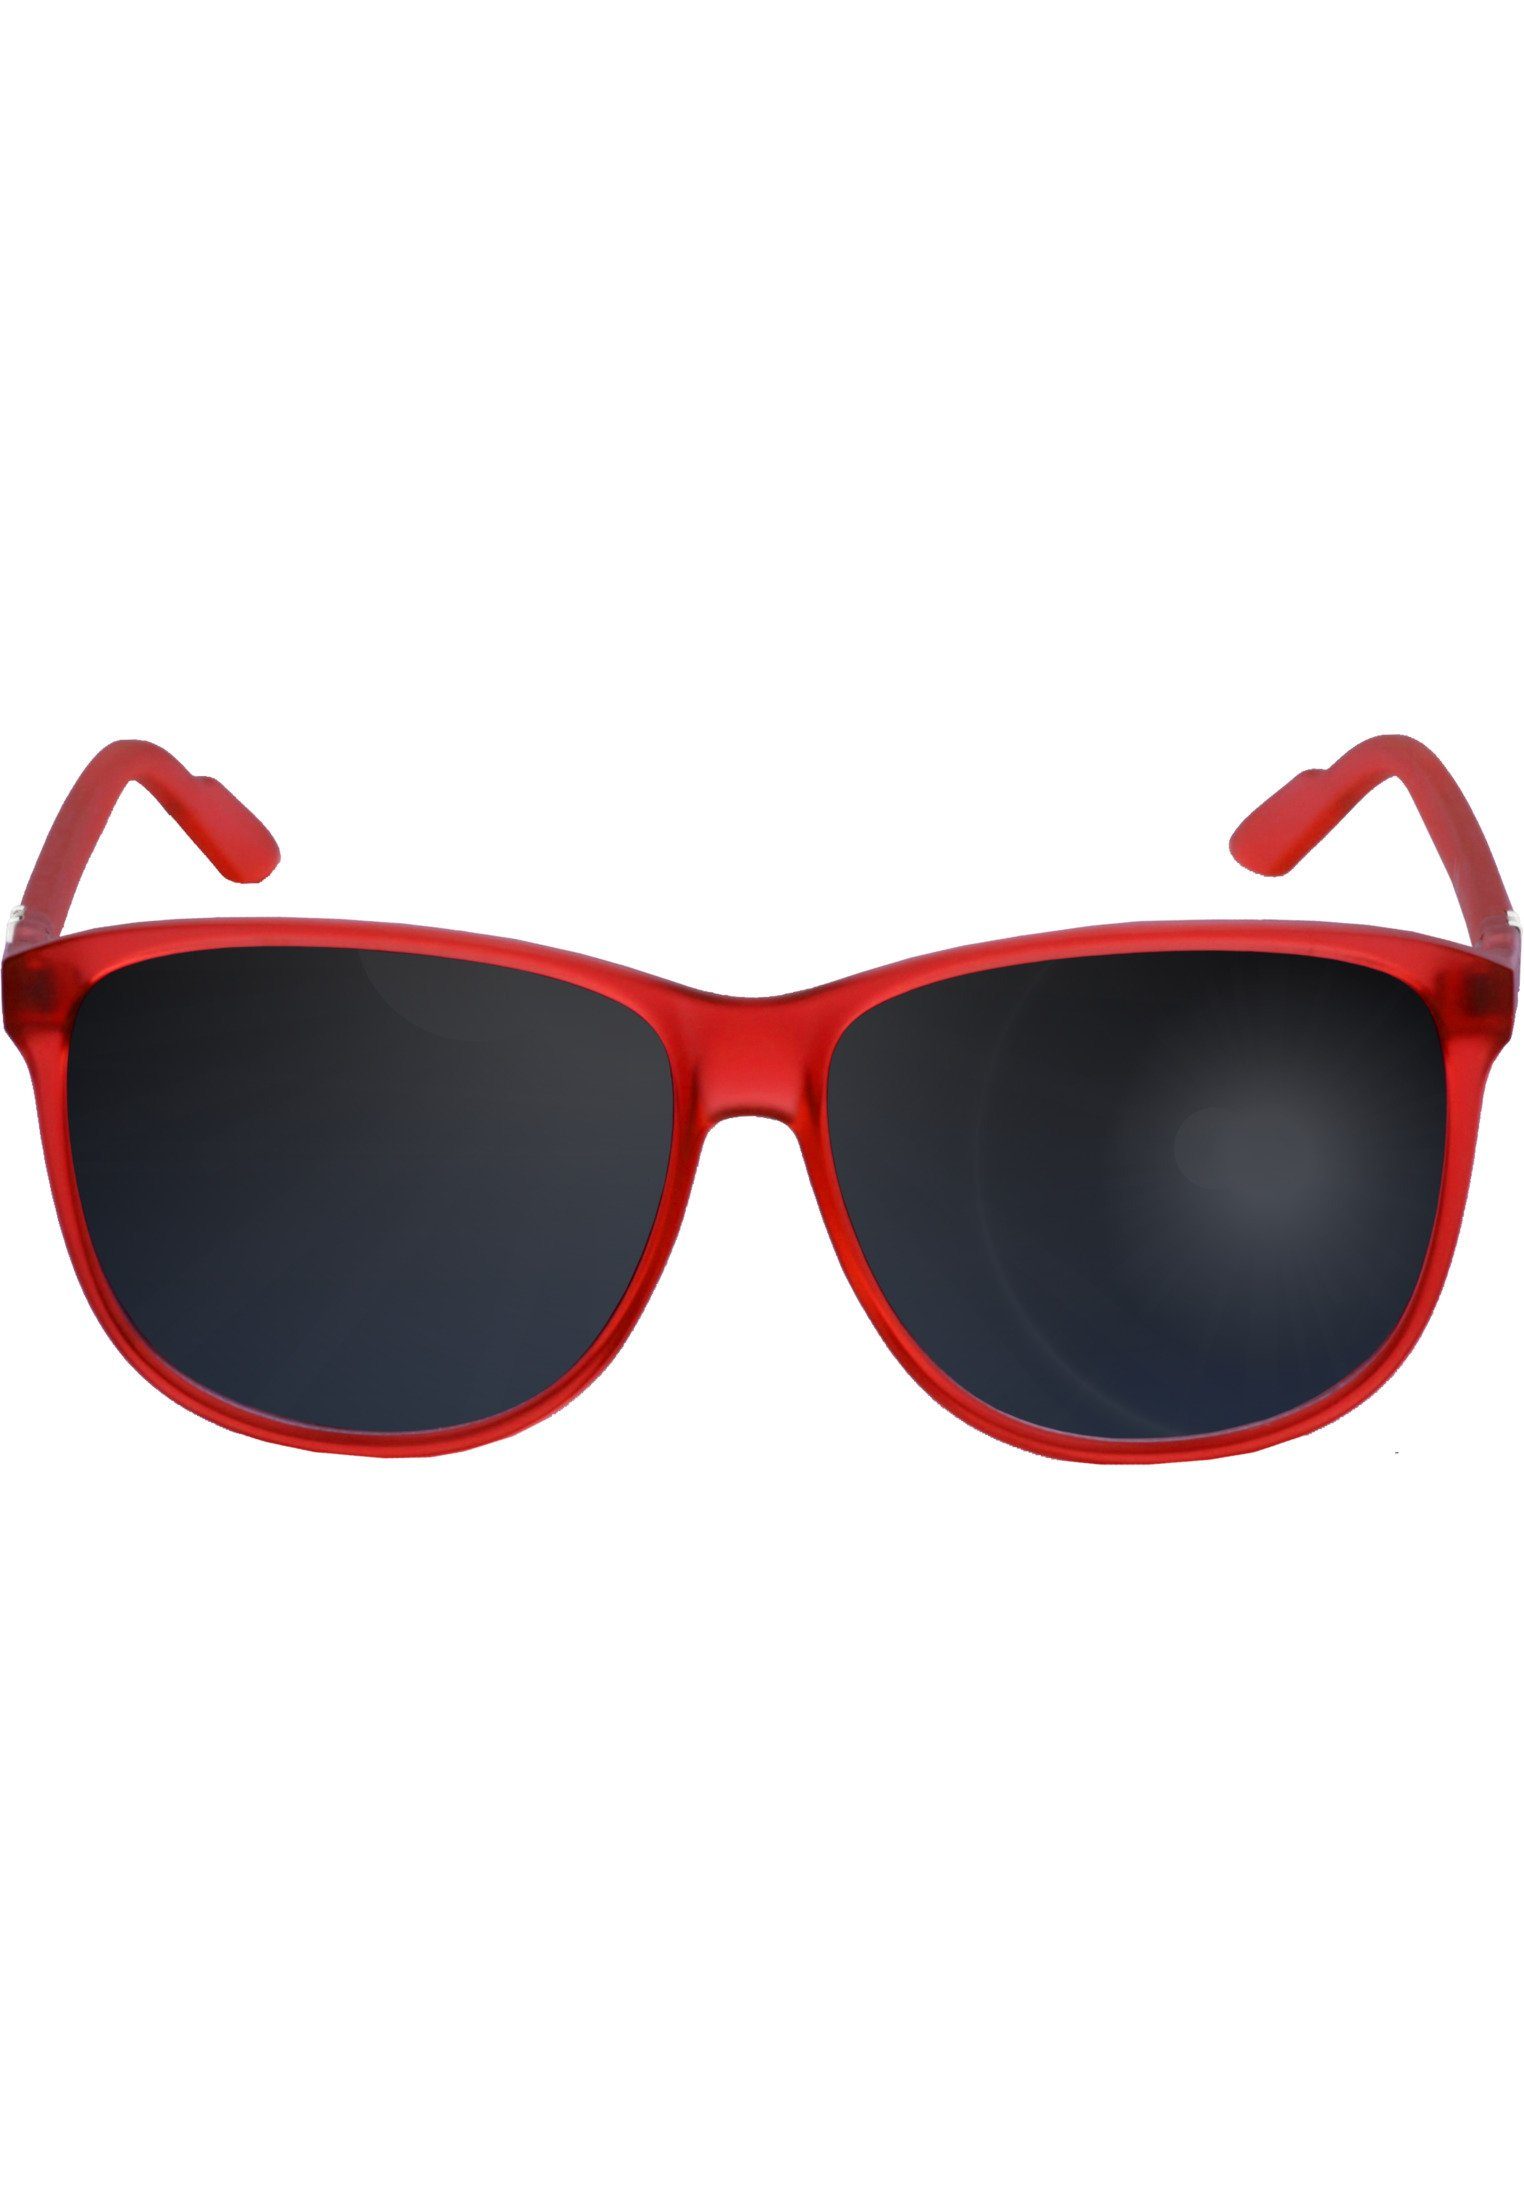 MSTRDS Sonnenbrille Sunglasses red Chirwa Accessoires